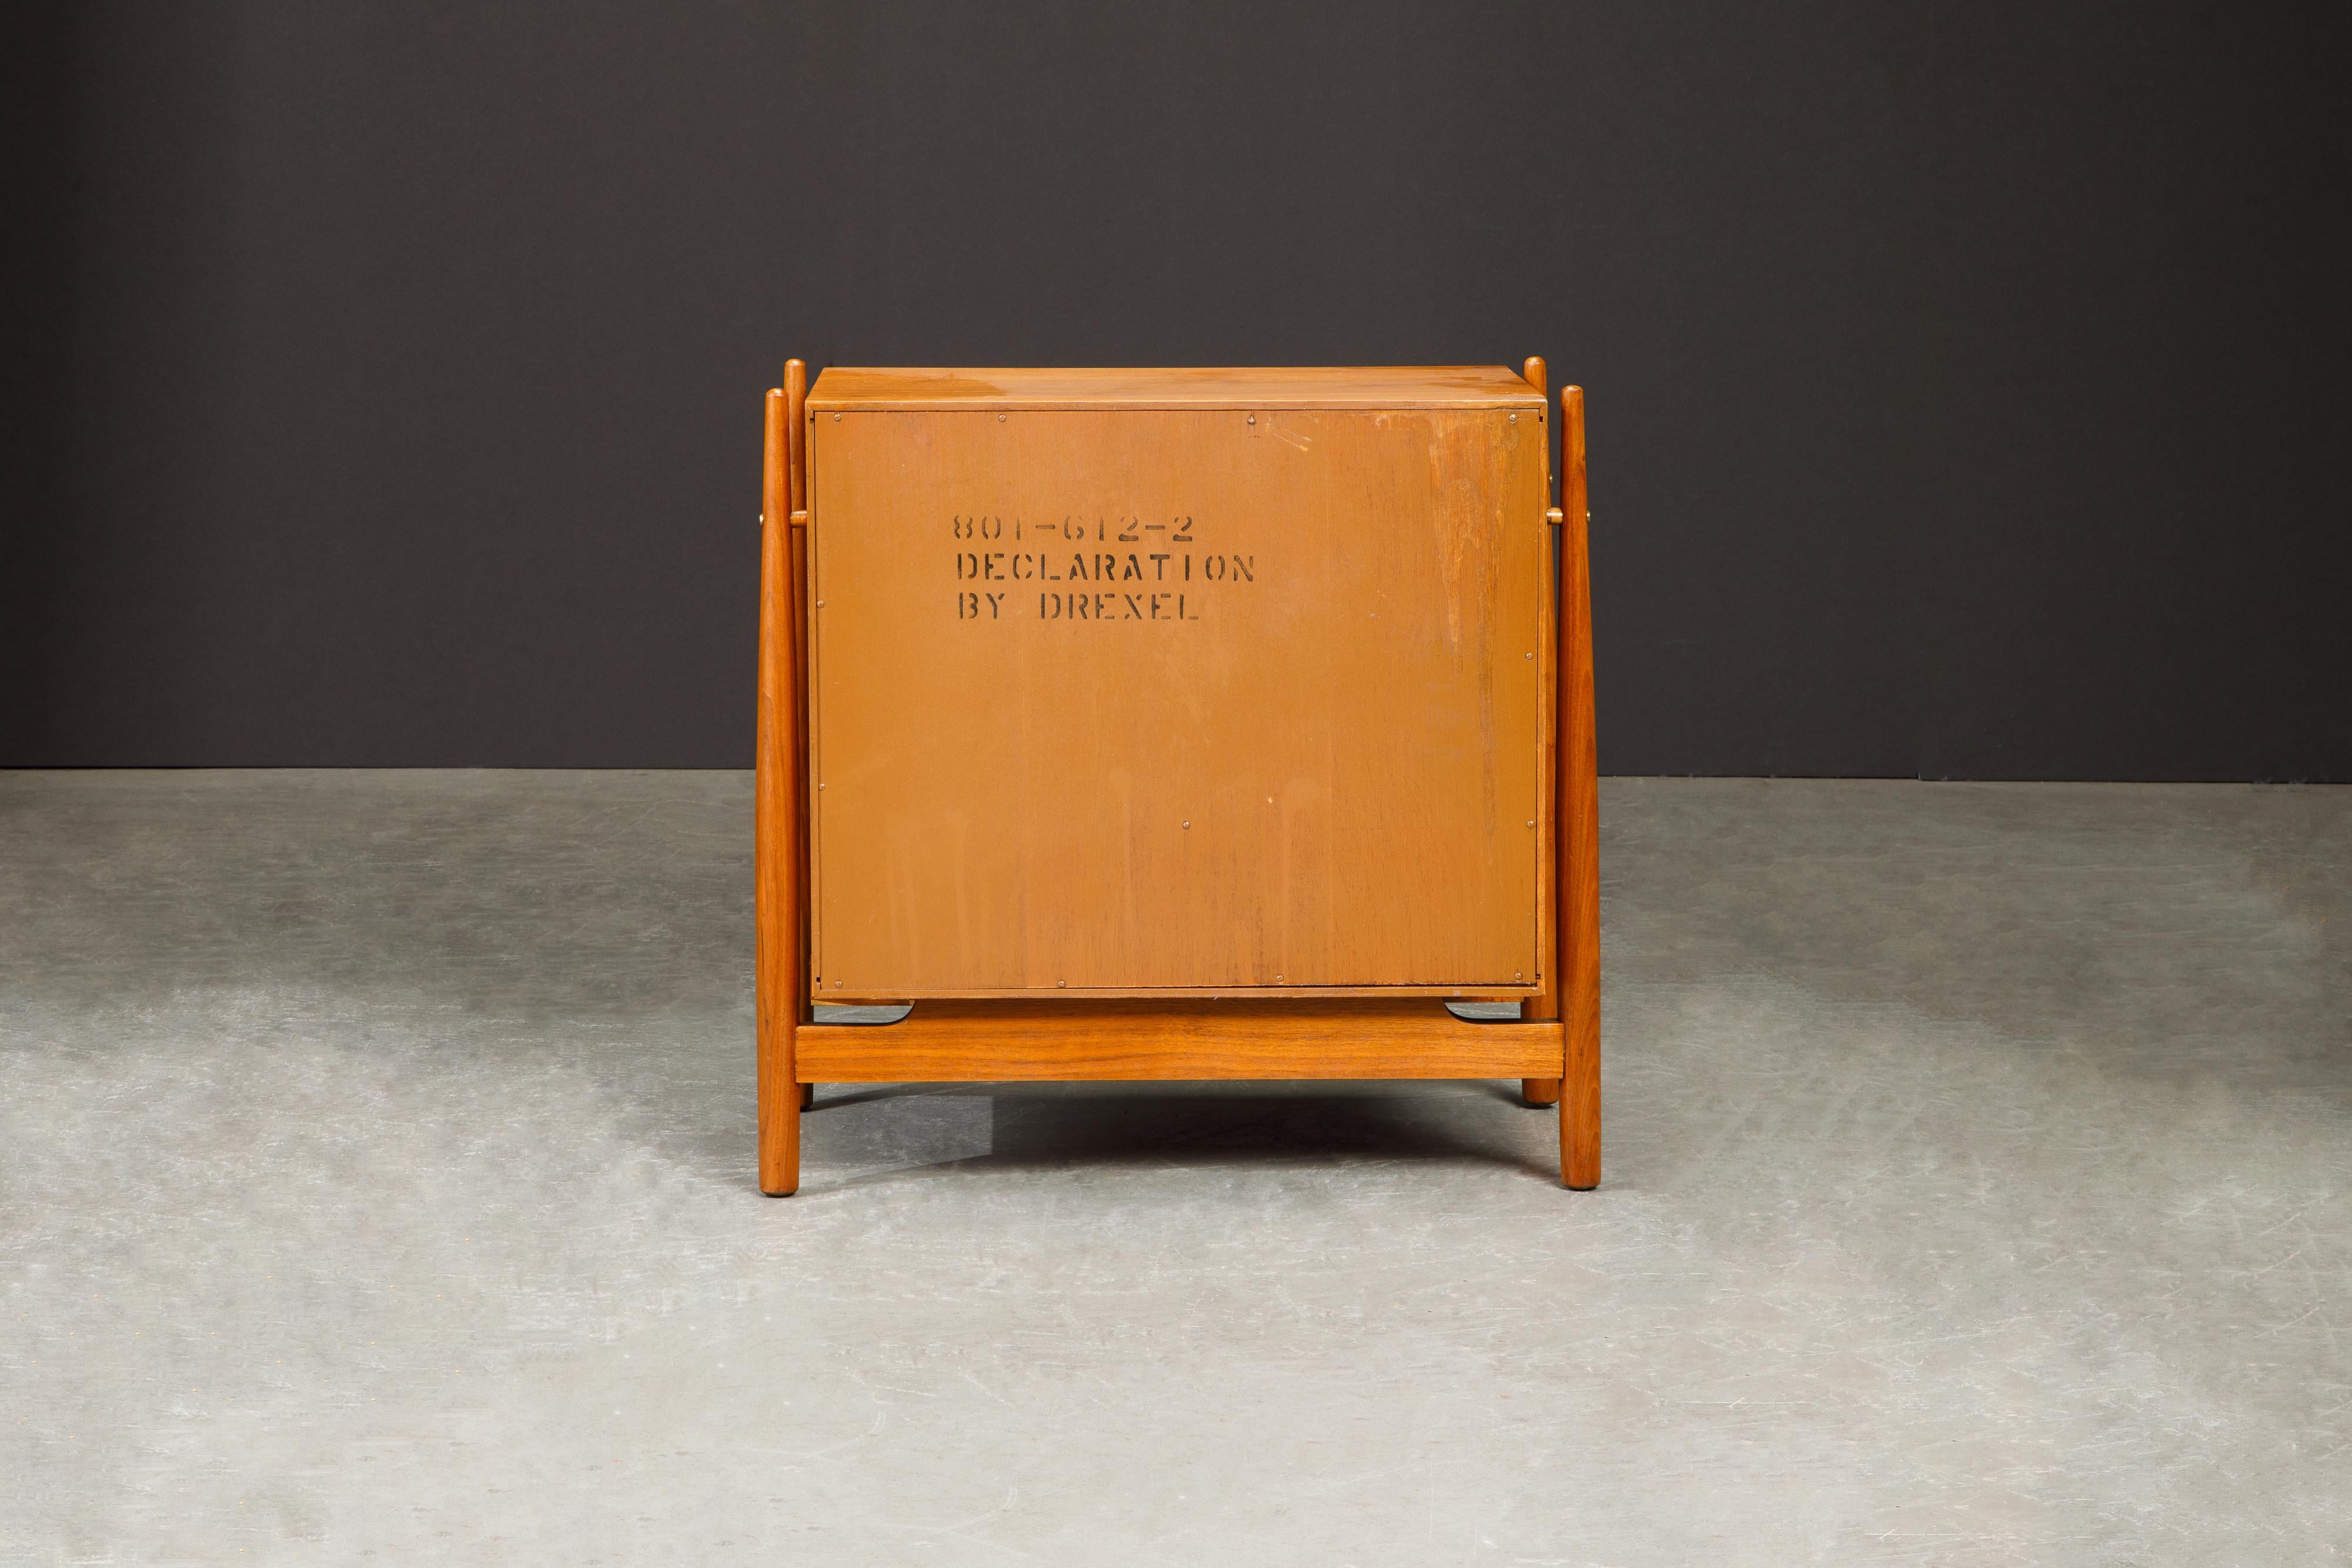 Mid-20th Century Kipp Stewart Declaration Floating Nightstand for Drexel, Refinished, Signed